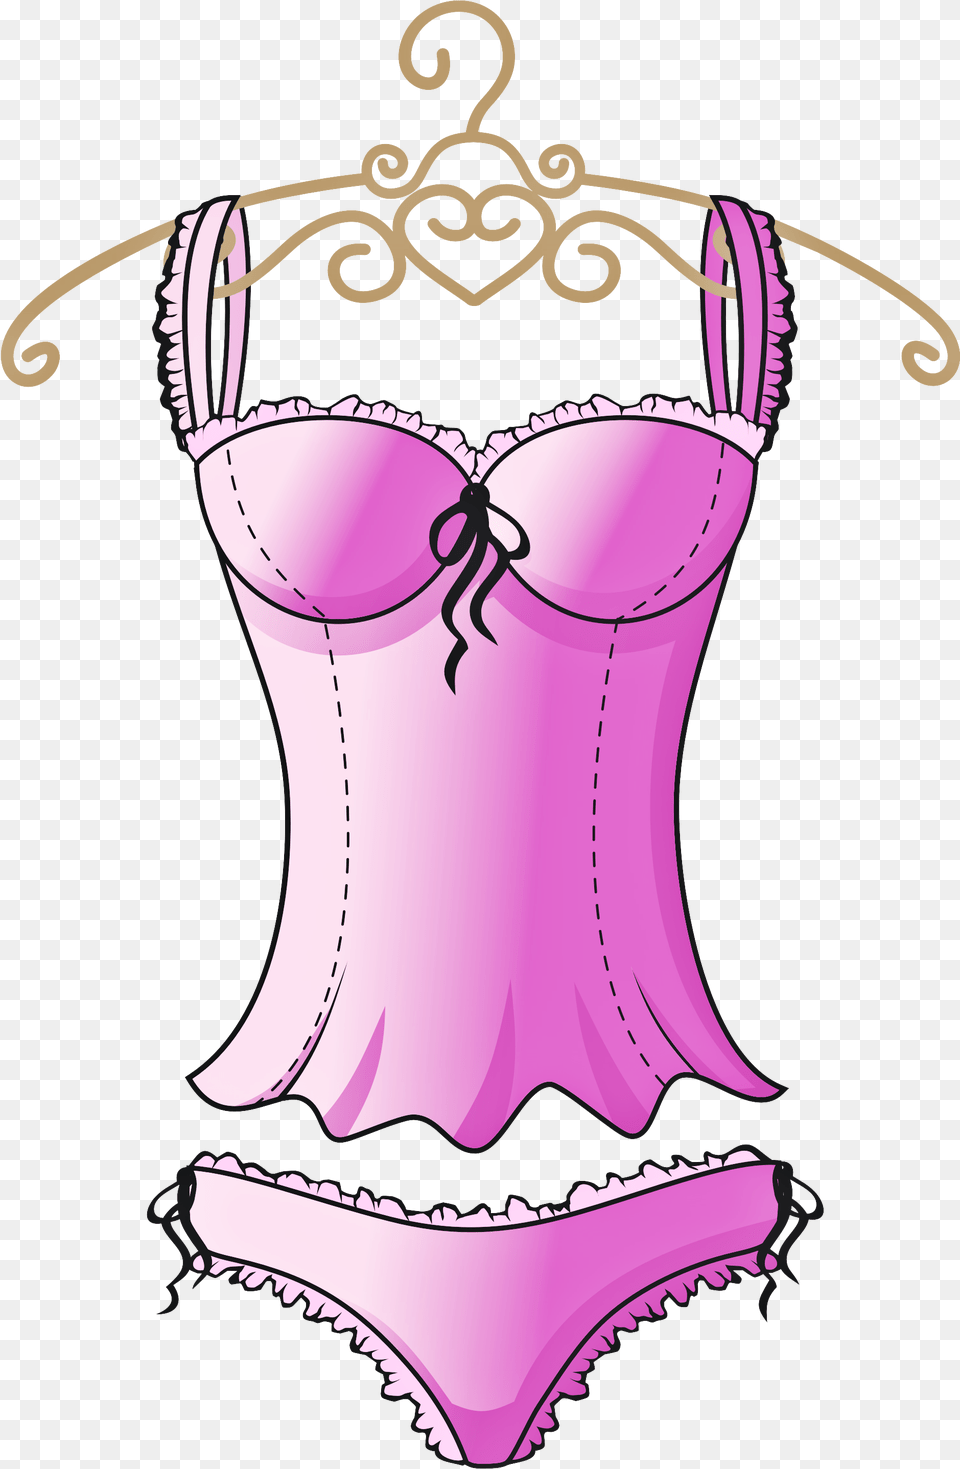 Lingerie With No Background Background Lingerie, Clothing, Underwear, Corset, Dynamite Png Image